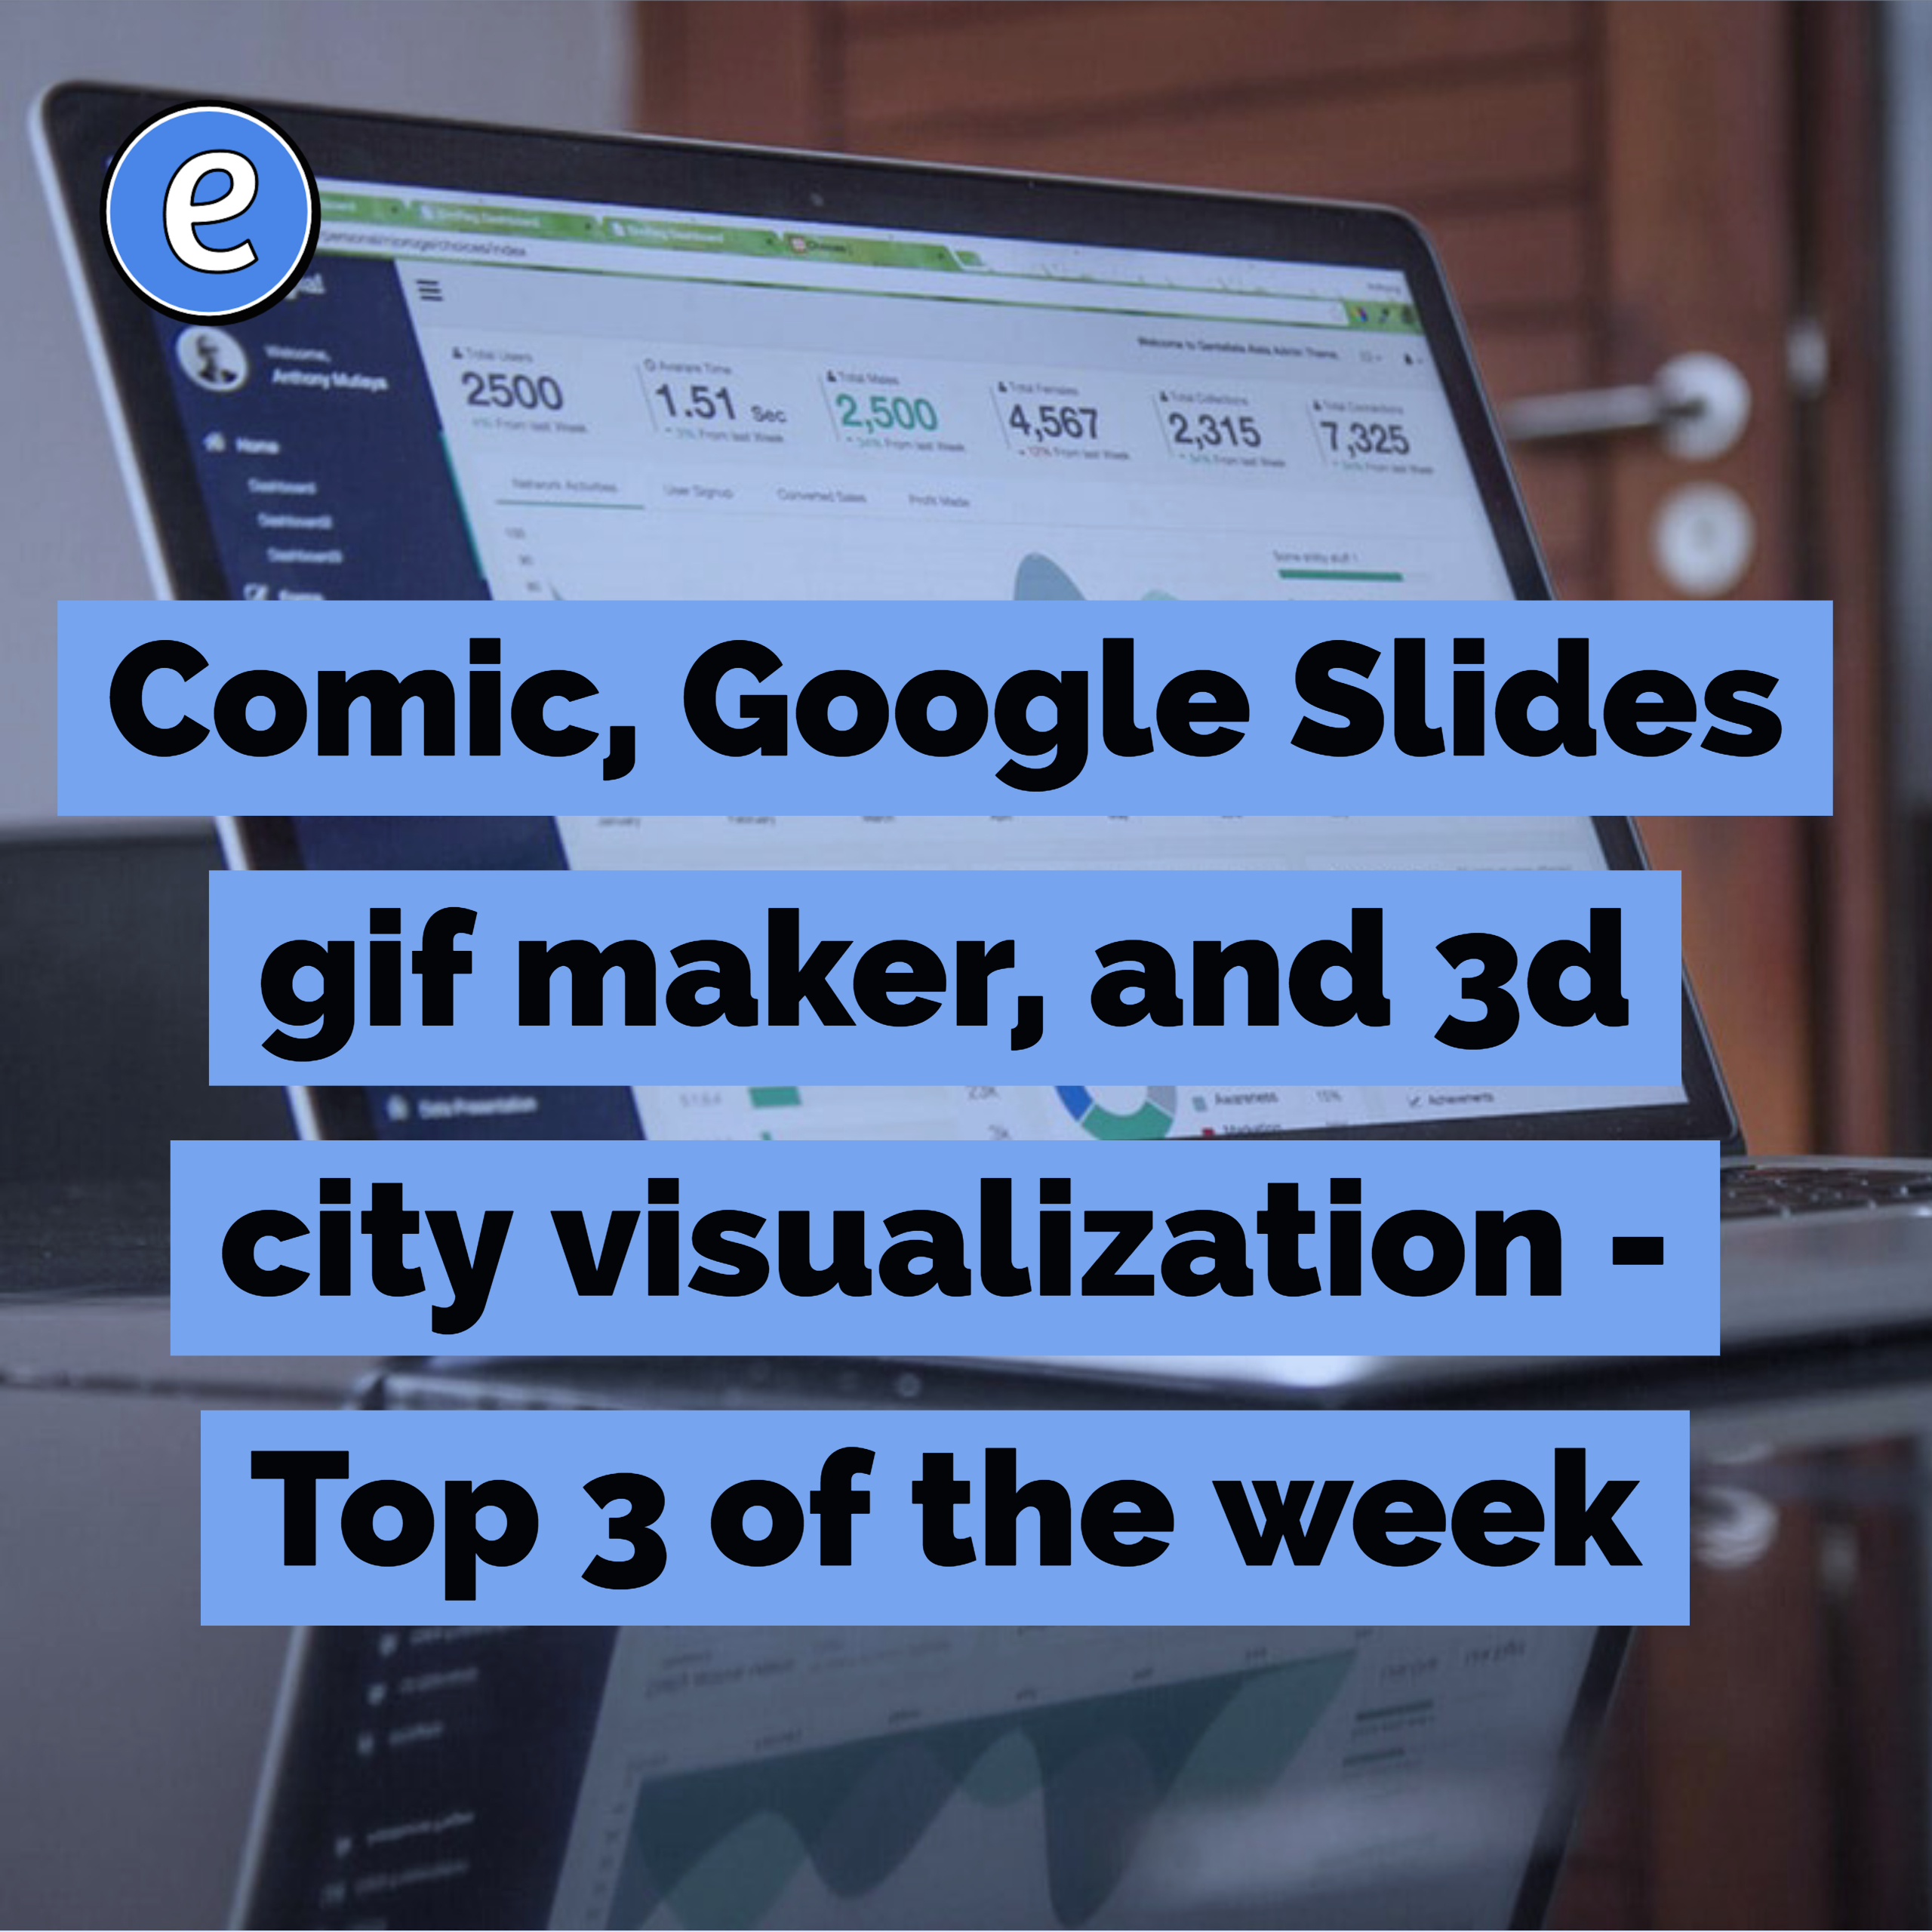 Comic, Google Slides gif maker, and 3d city visualization – Top 3 of the week